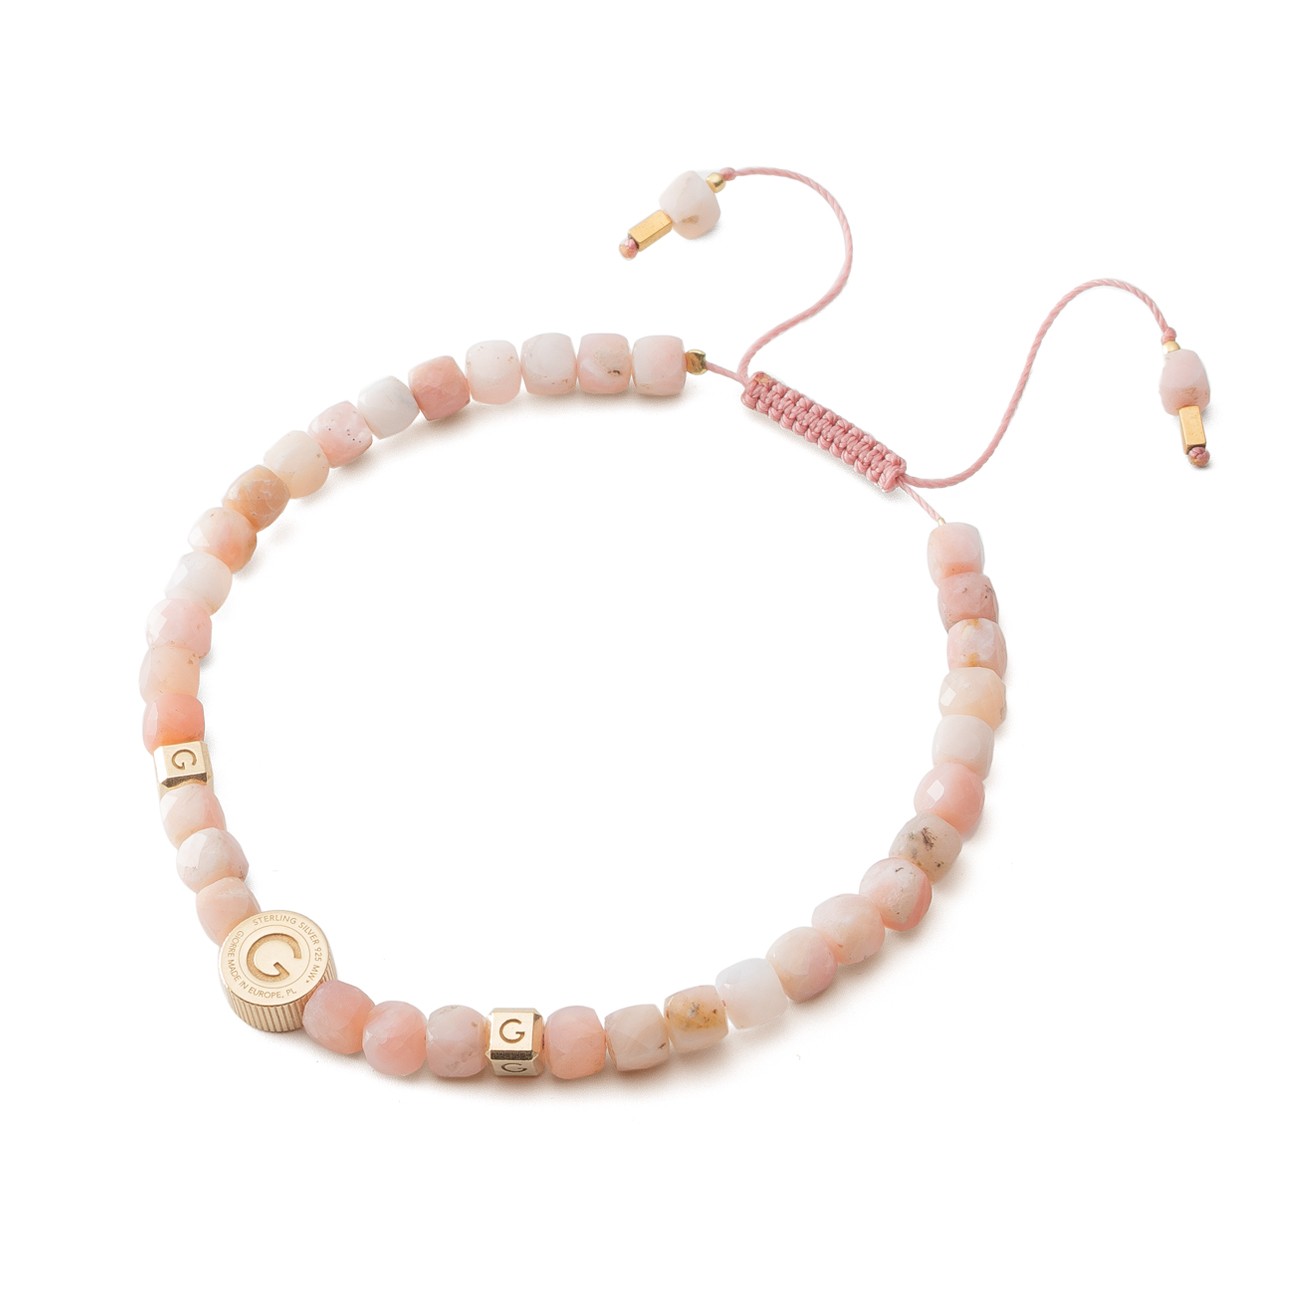 Silver anklet with natural stone - pink opal